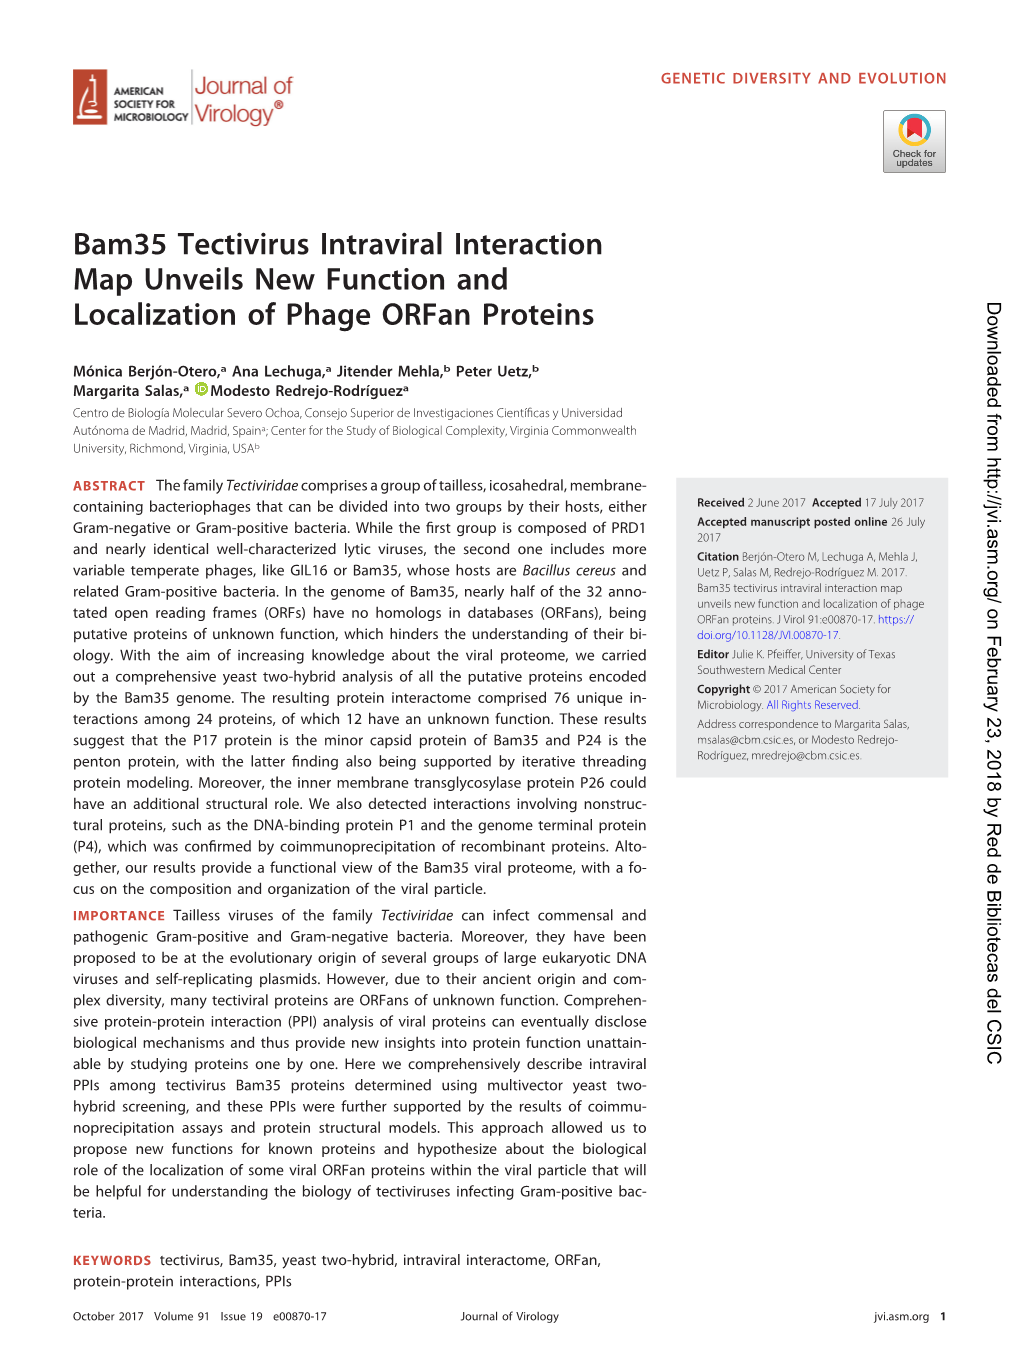 Bam35 Tectivirus Intraviral Interaction Map Unveils New Function and Localization of Phage Orfan Proteins Downloaded From